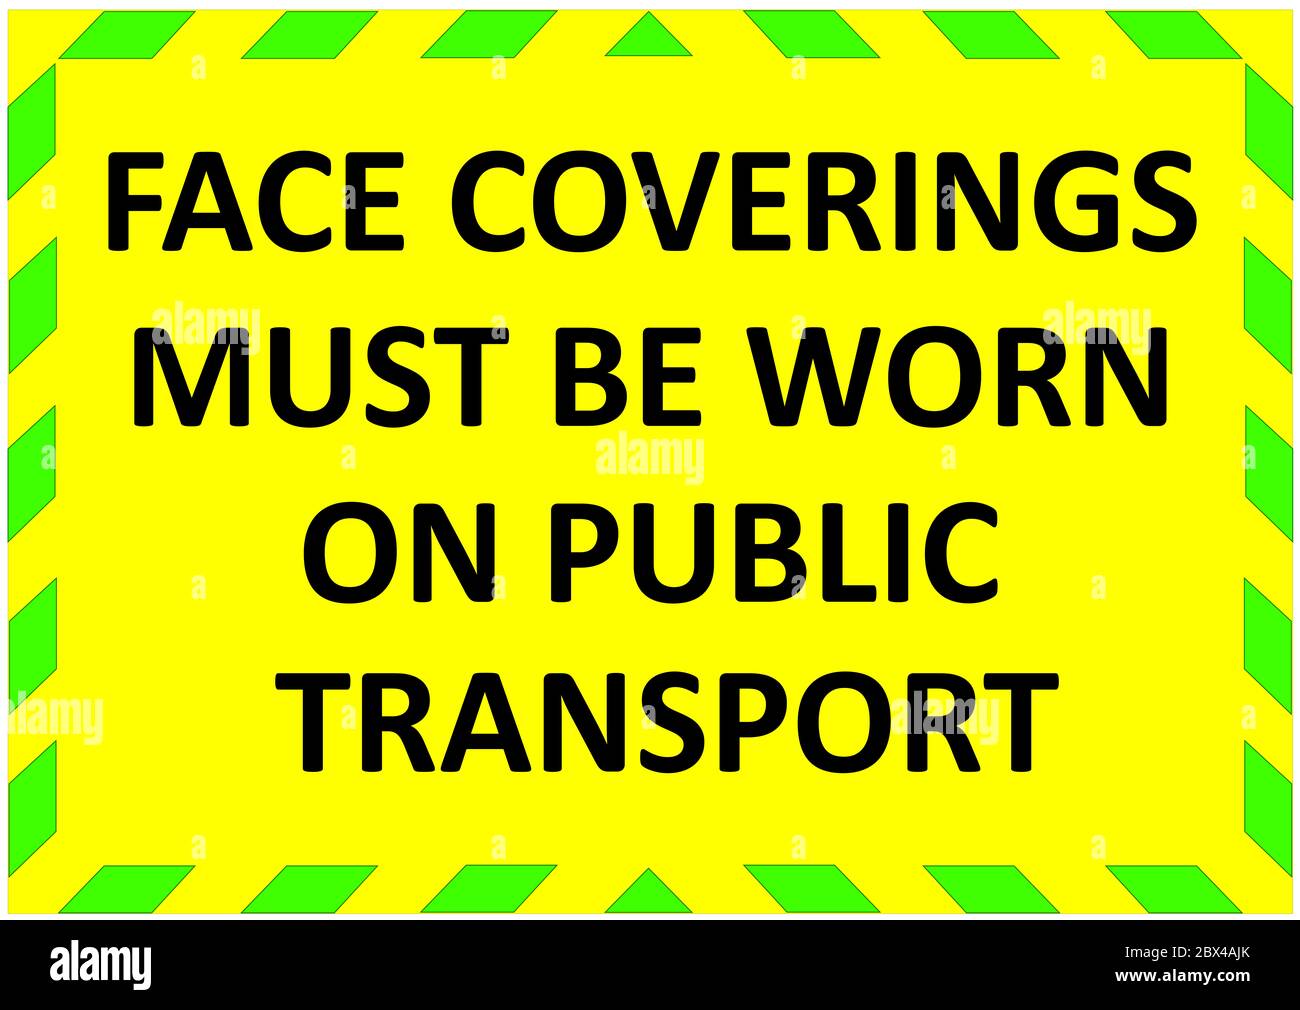 FACE COVERINGS MUST BE WORN ON PUBLIC TRANSPORT warning sign. Green quarantine sign that help to battle against Covid-19 in the UK. RASTER. Stock Photo